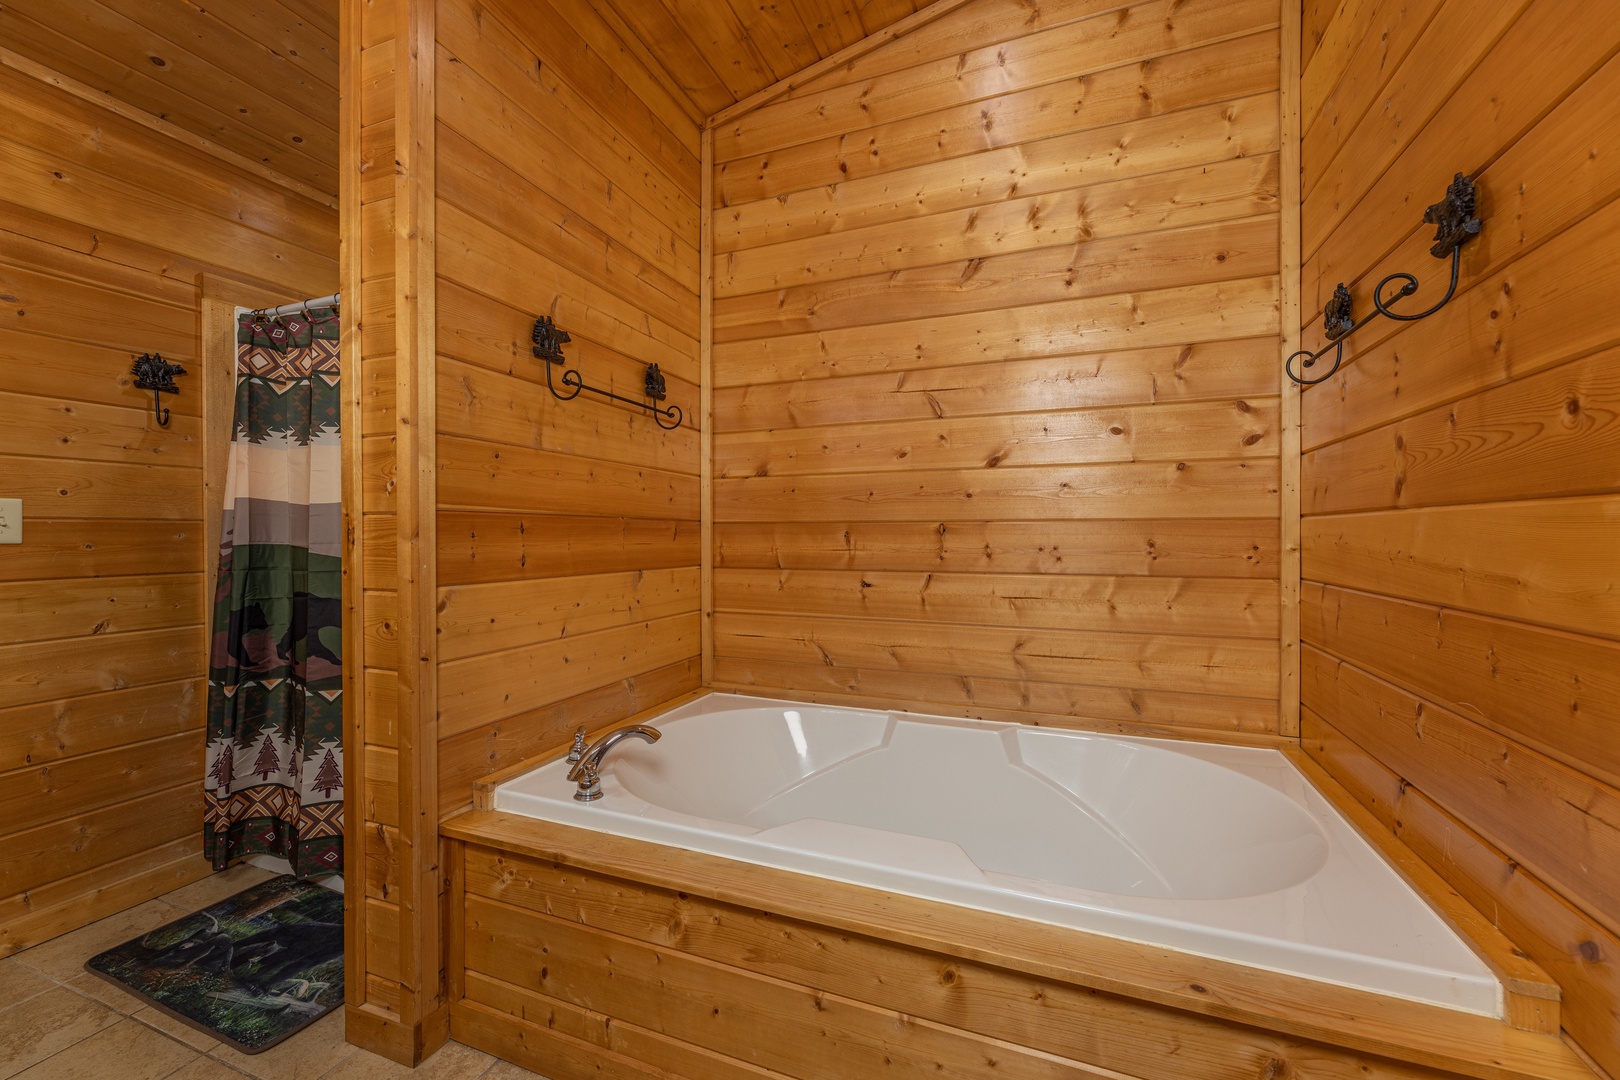 Jacuzzi tub at 3 Crazy Cubs, a 5 bedroom cabin rental located in Pigeon Forge